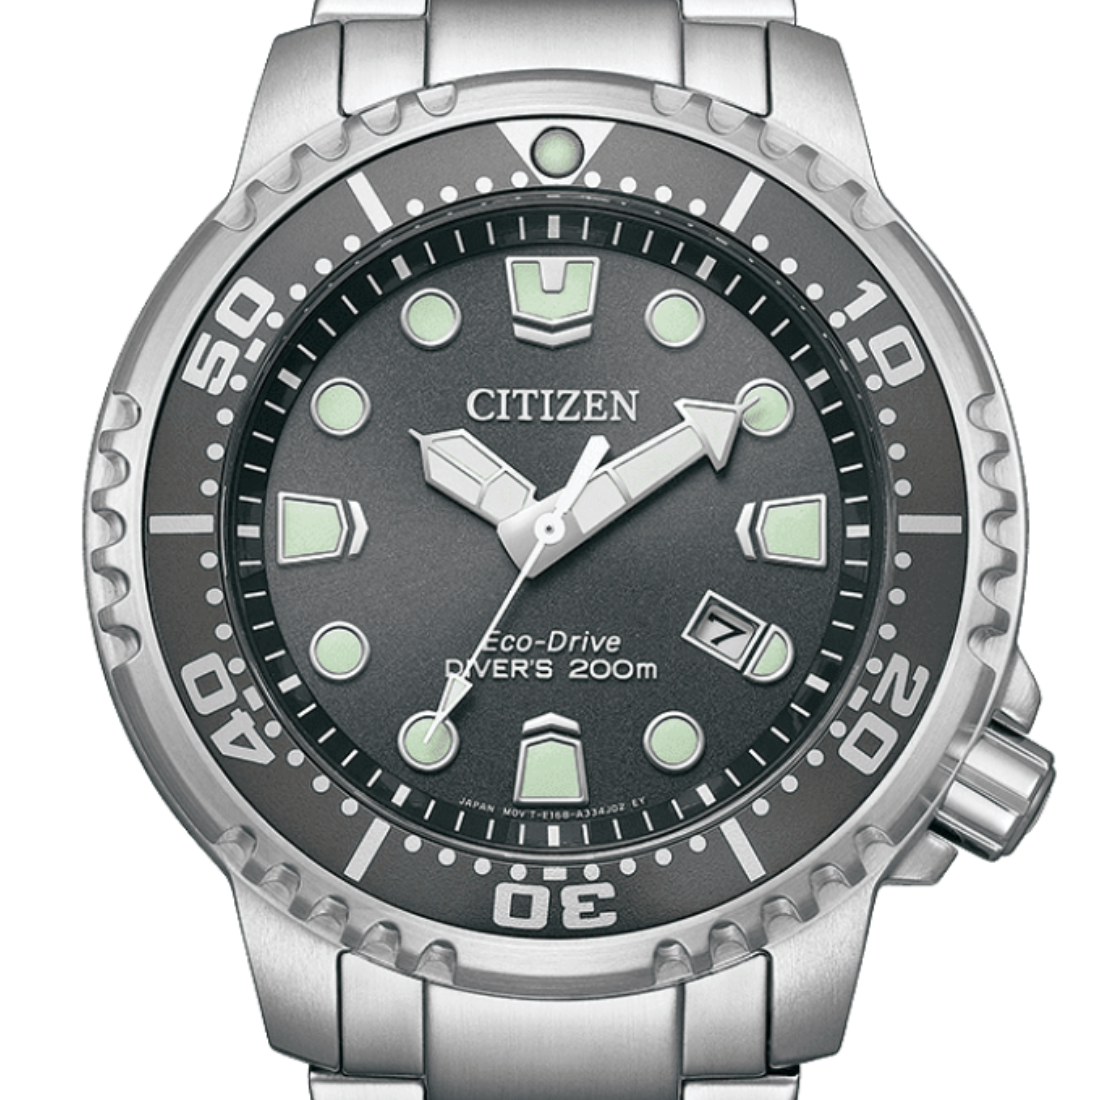 Citizen Promaster Eco-Drive Divers 200m Watch BN0167-50H BN0167-50